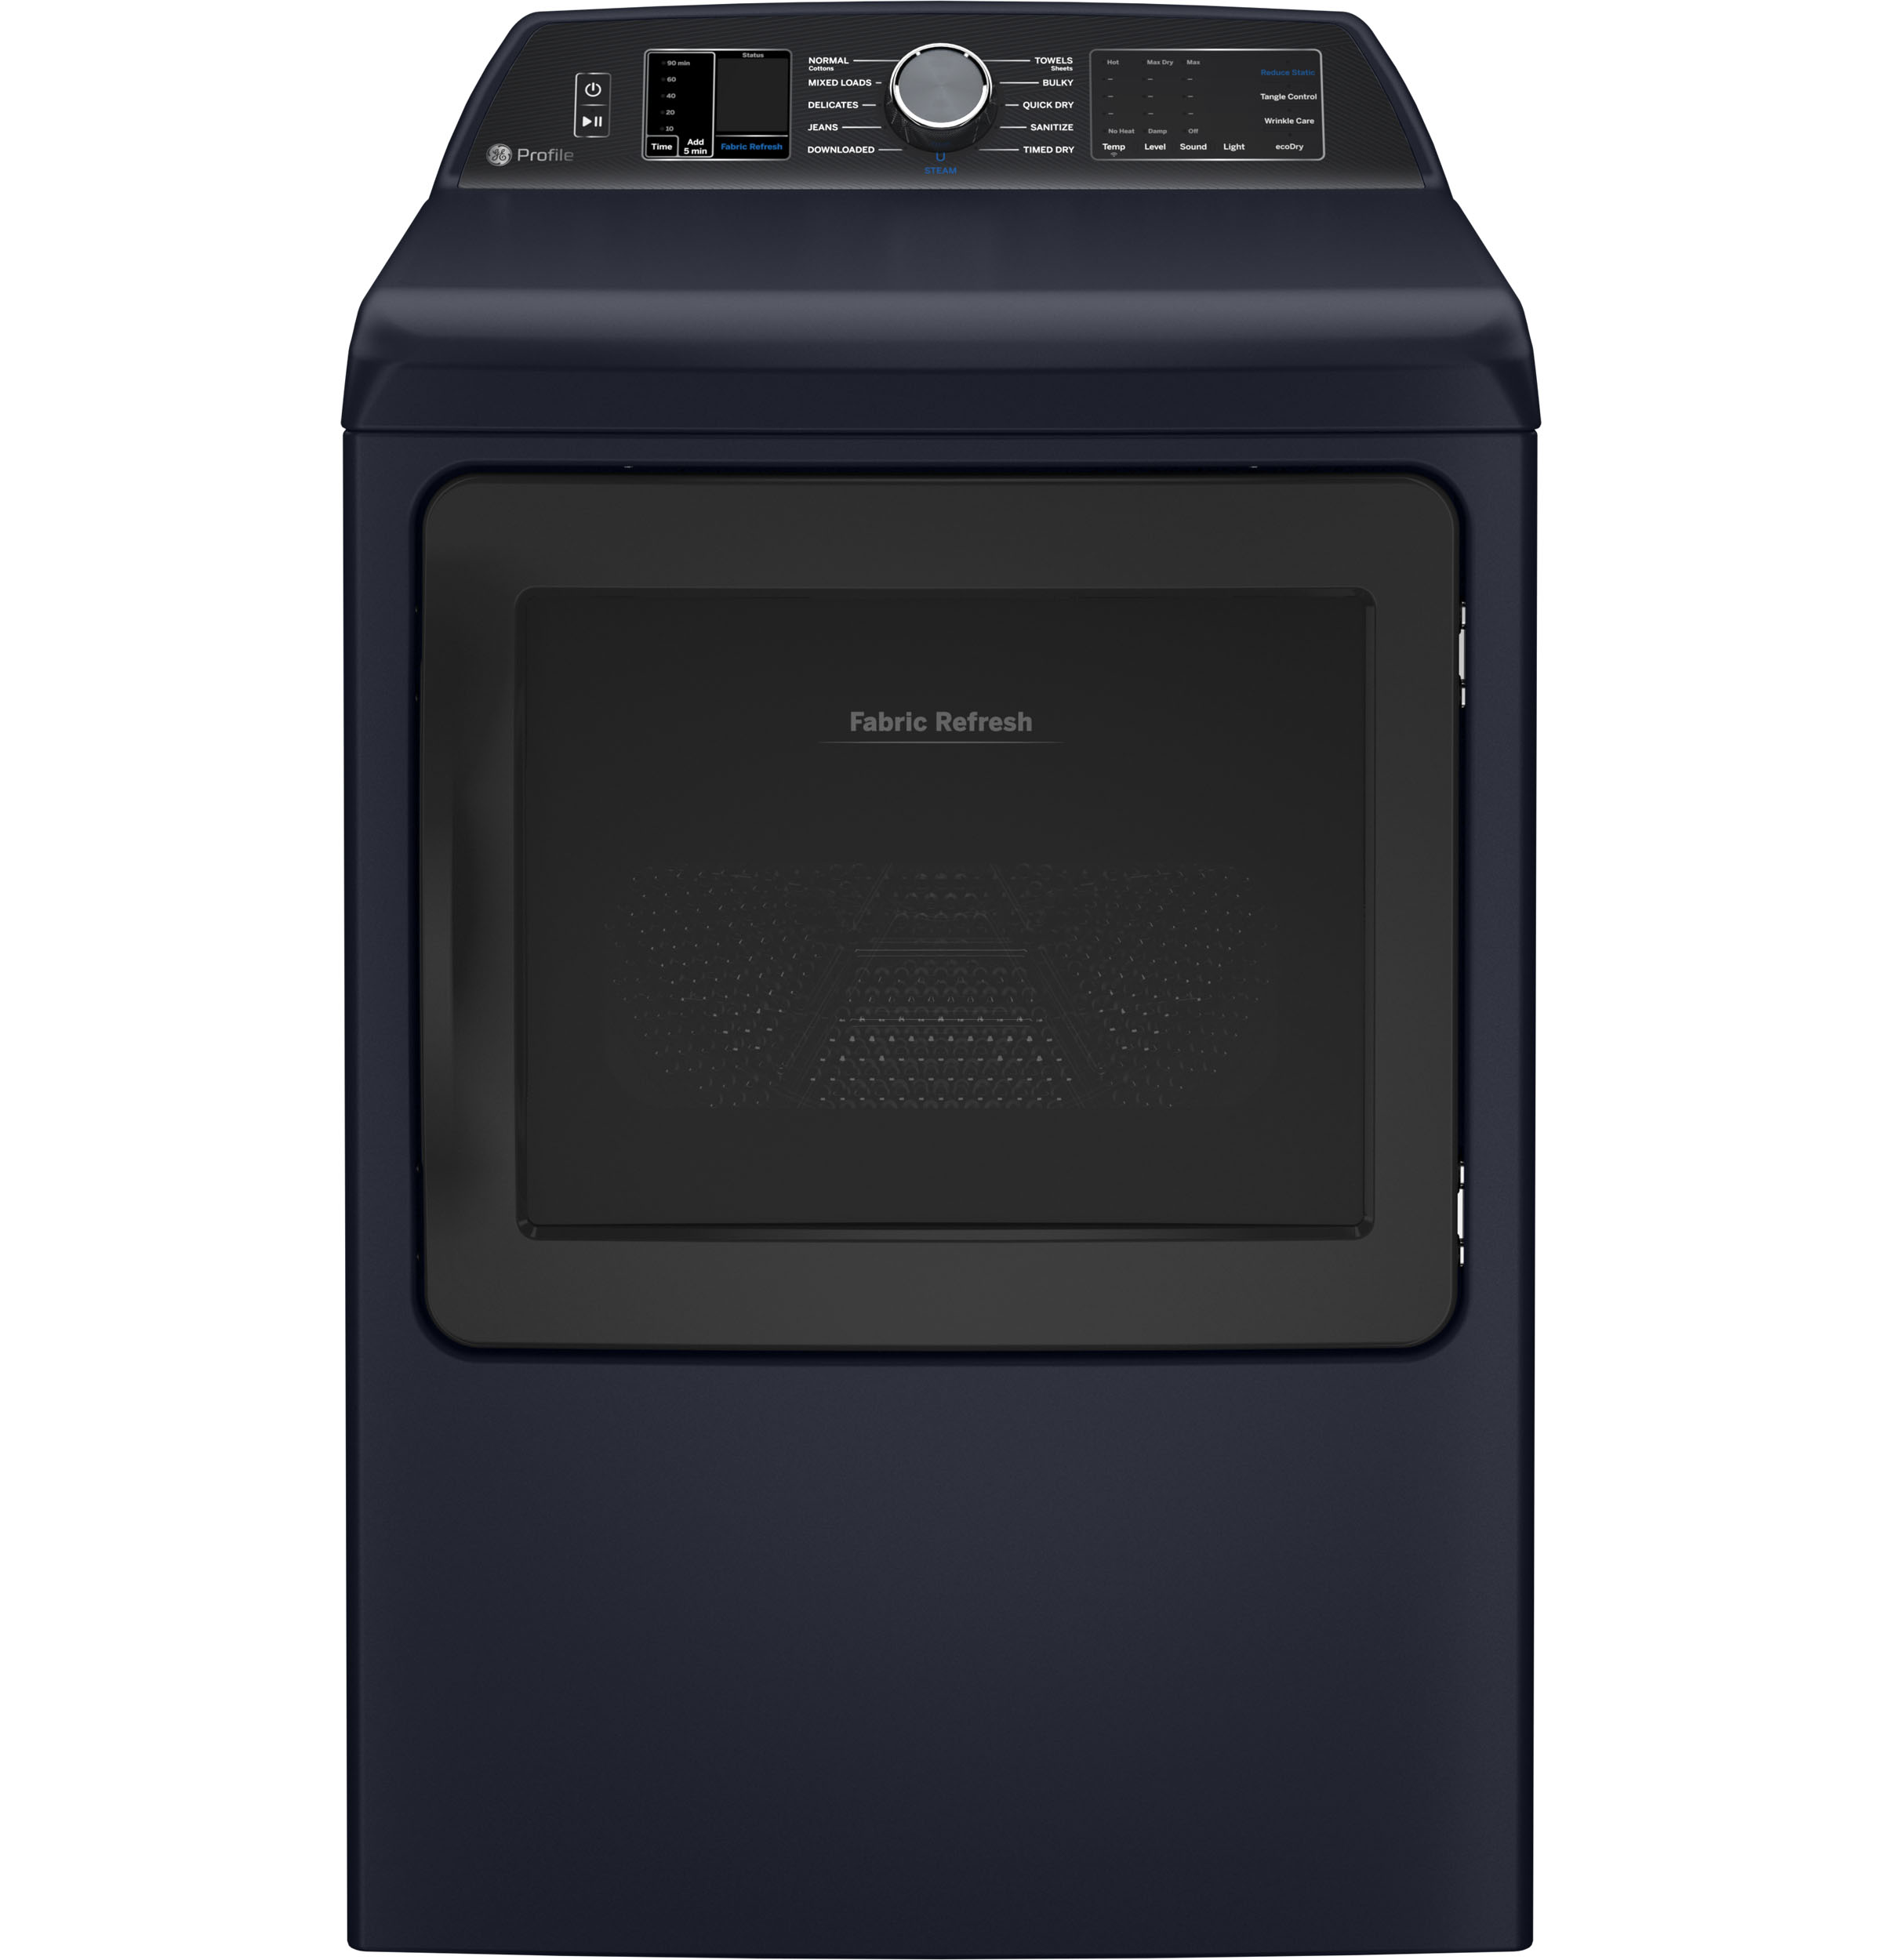 GE Profile™ ENERGY STAR® 7.3 cu. ft. Capacity Smart Gas Dryer with Fabric Refresh